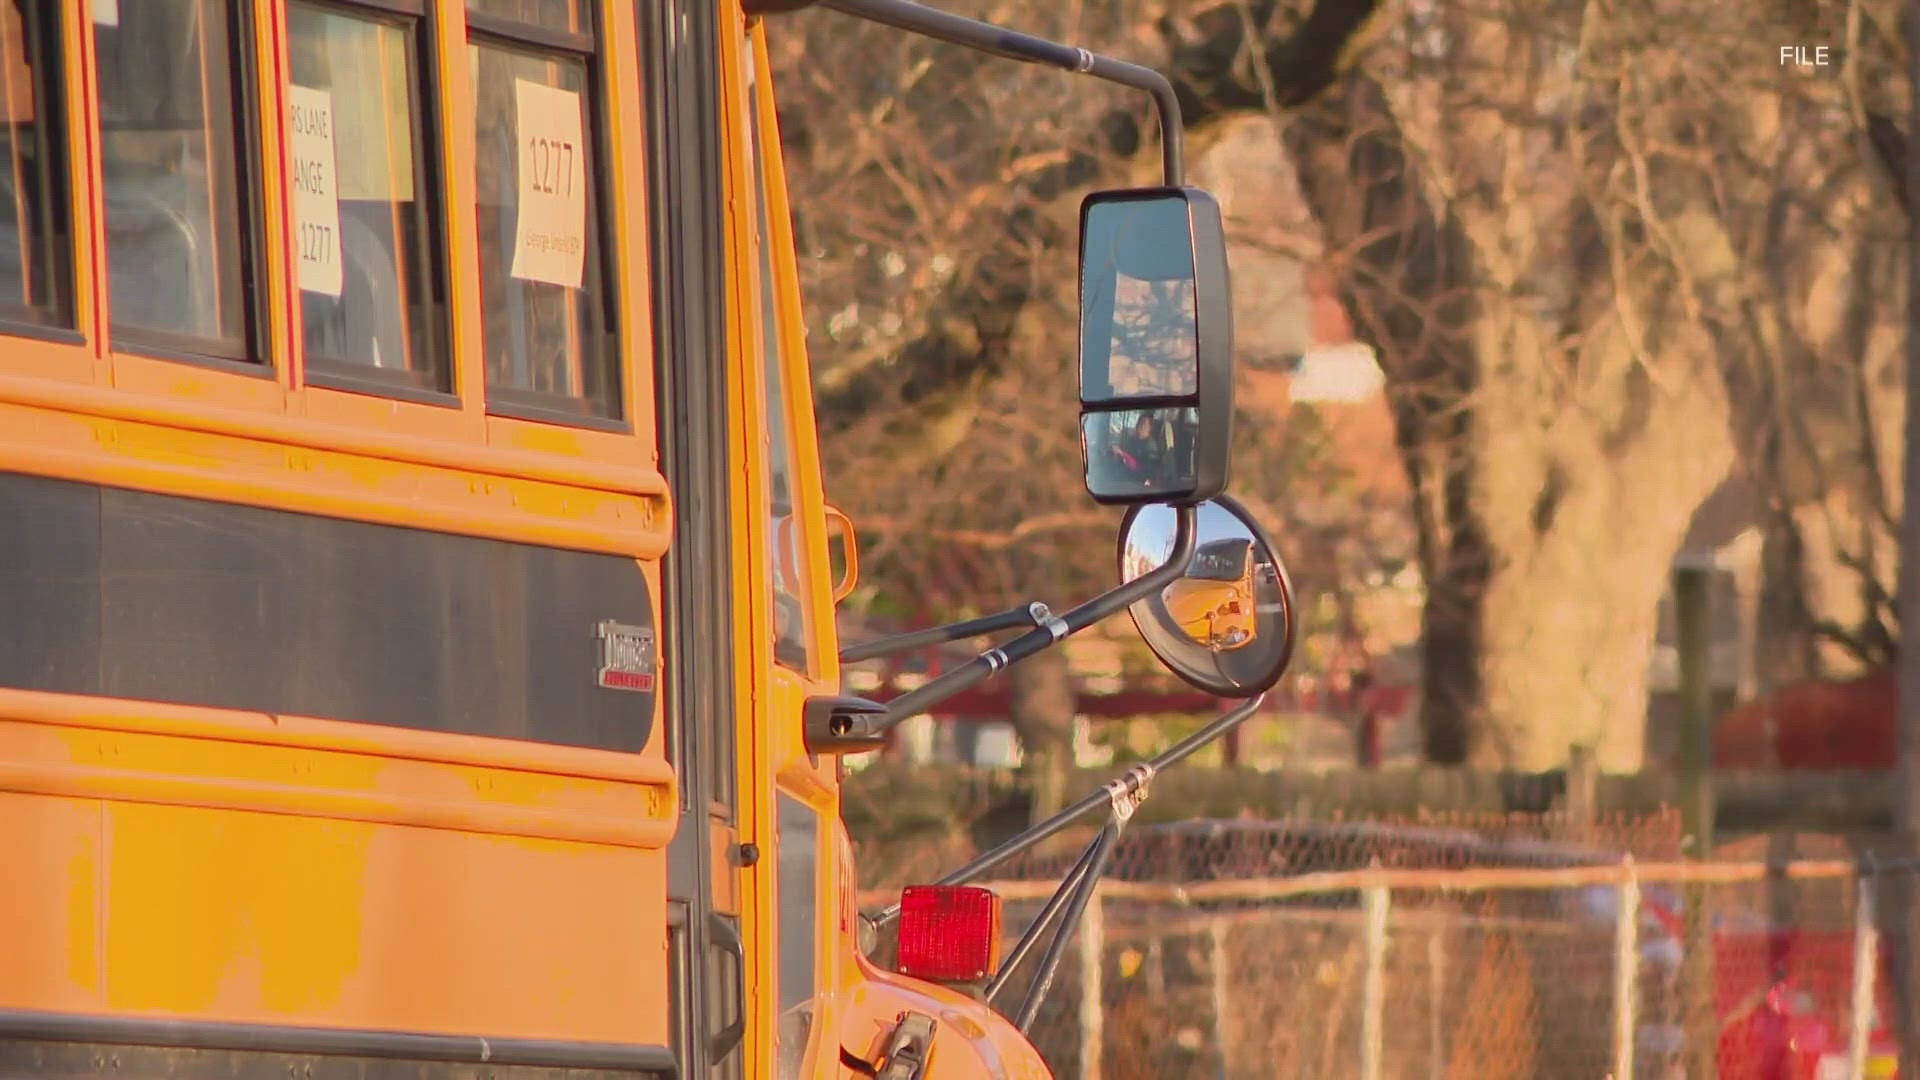 The first option would only provide bus service for students attending JCPS resides schools.